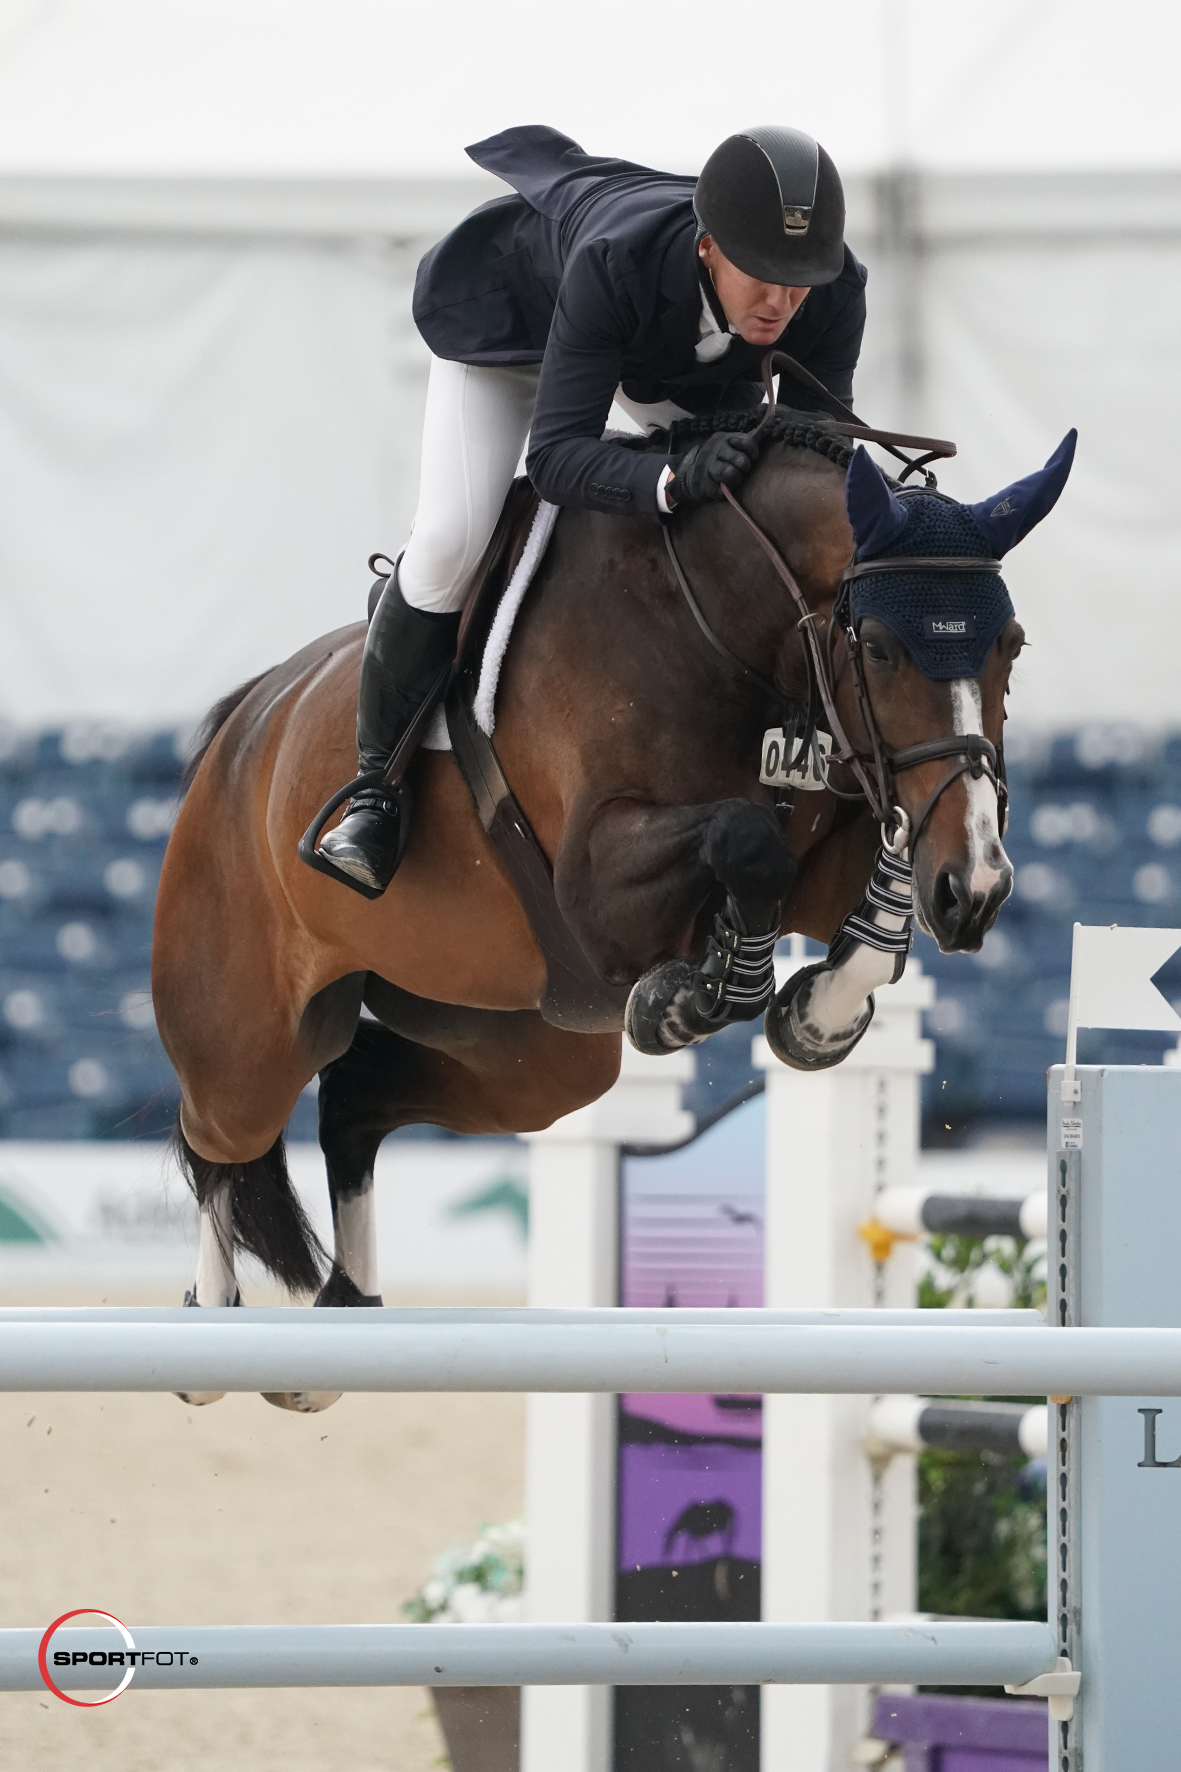 McLain Ward and Blossom Z Fly in Top Form for the Win in the $50,000 CaptiveOne Advisors 1.50m National Grand Prix